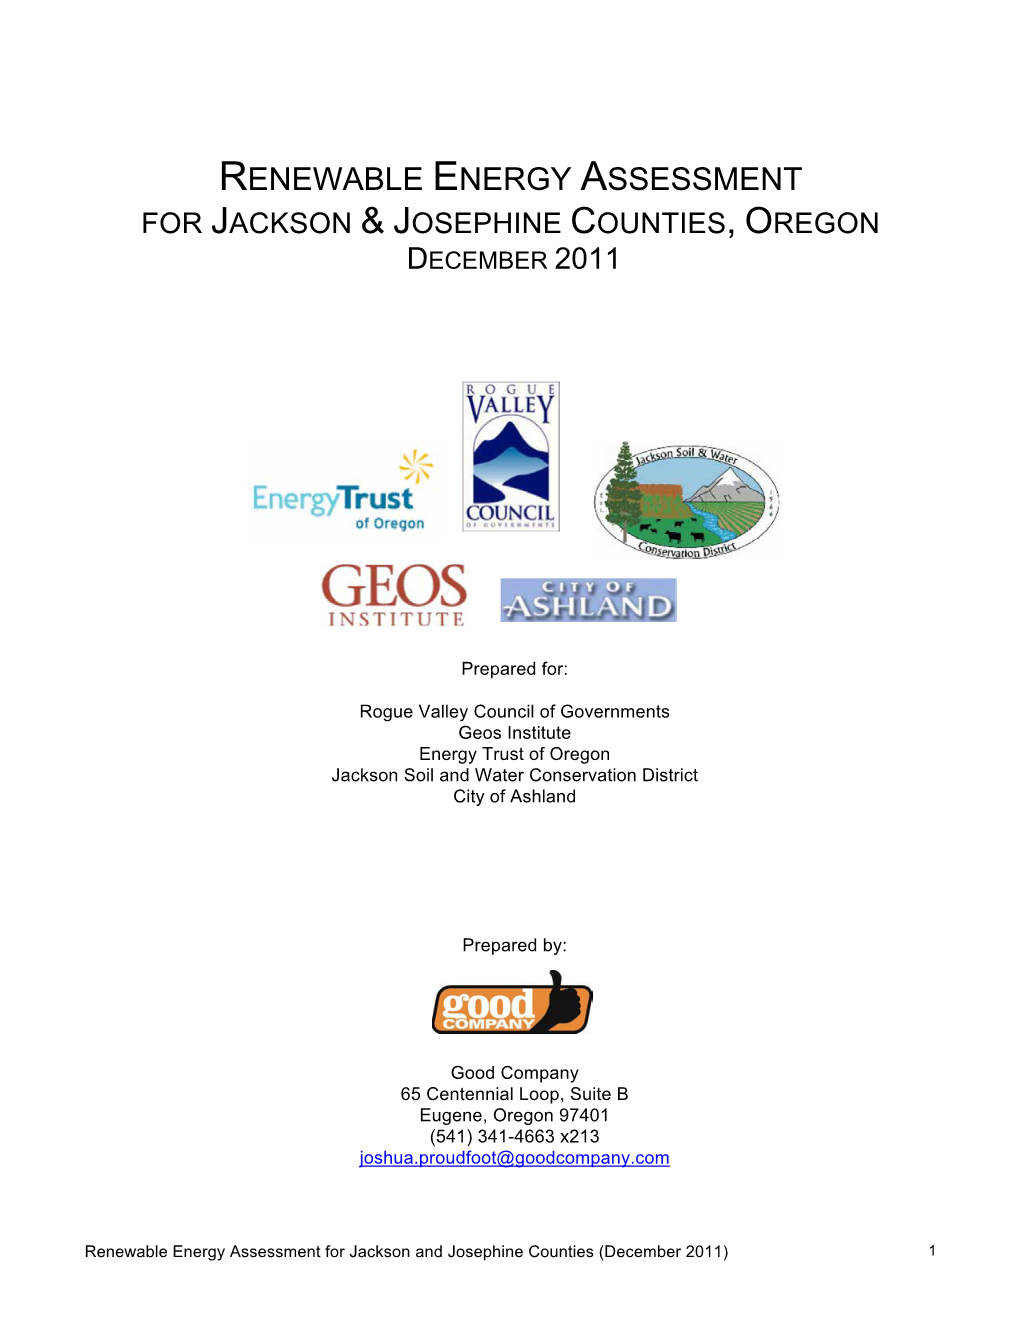 Renewable Energy Assessment for Jackson and Josephine Counties (December 2011) 1